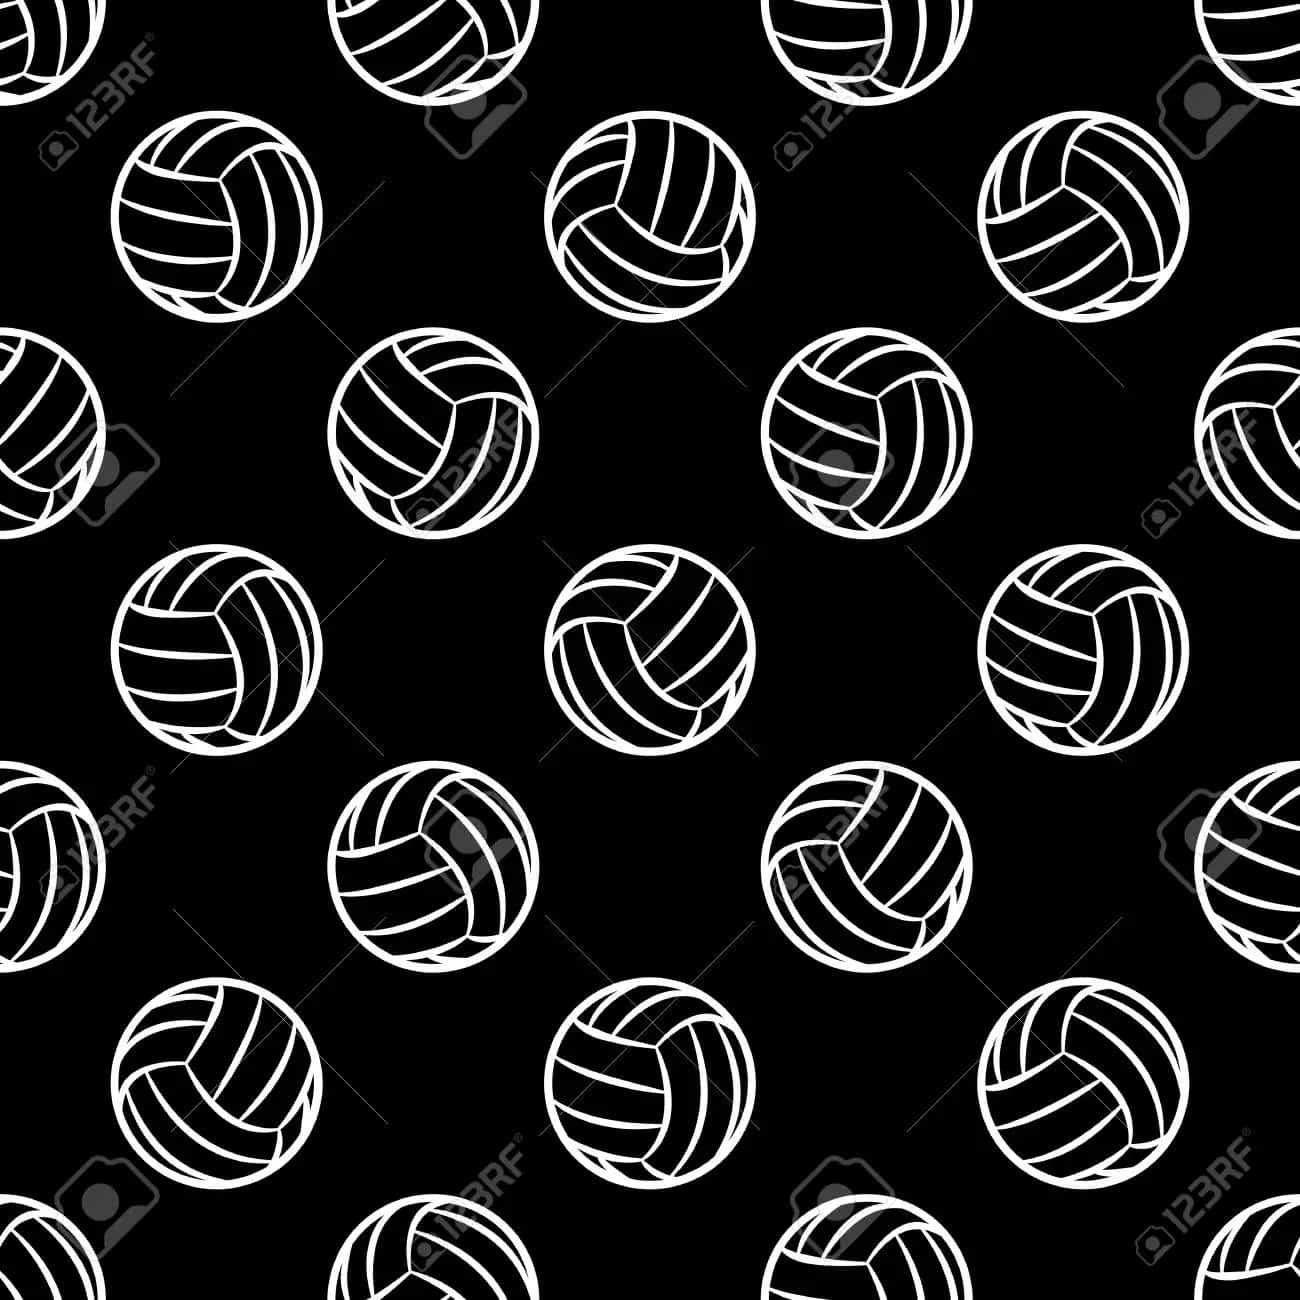 Bump, set, and spike with a classic volleyball. Wallpaper